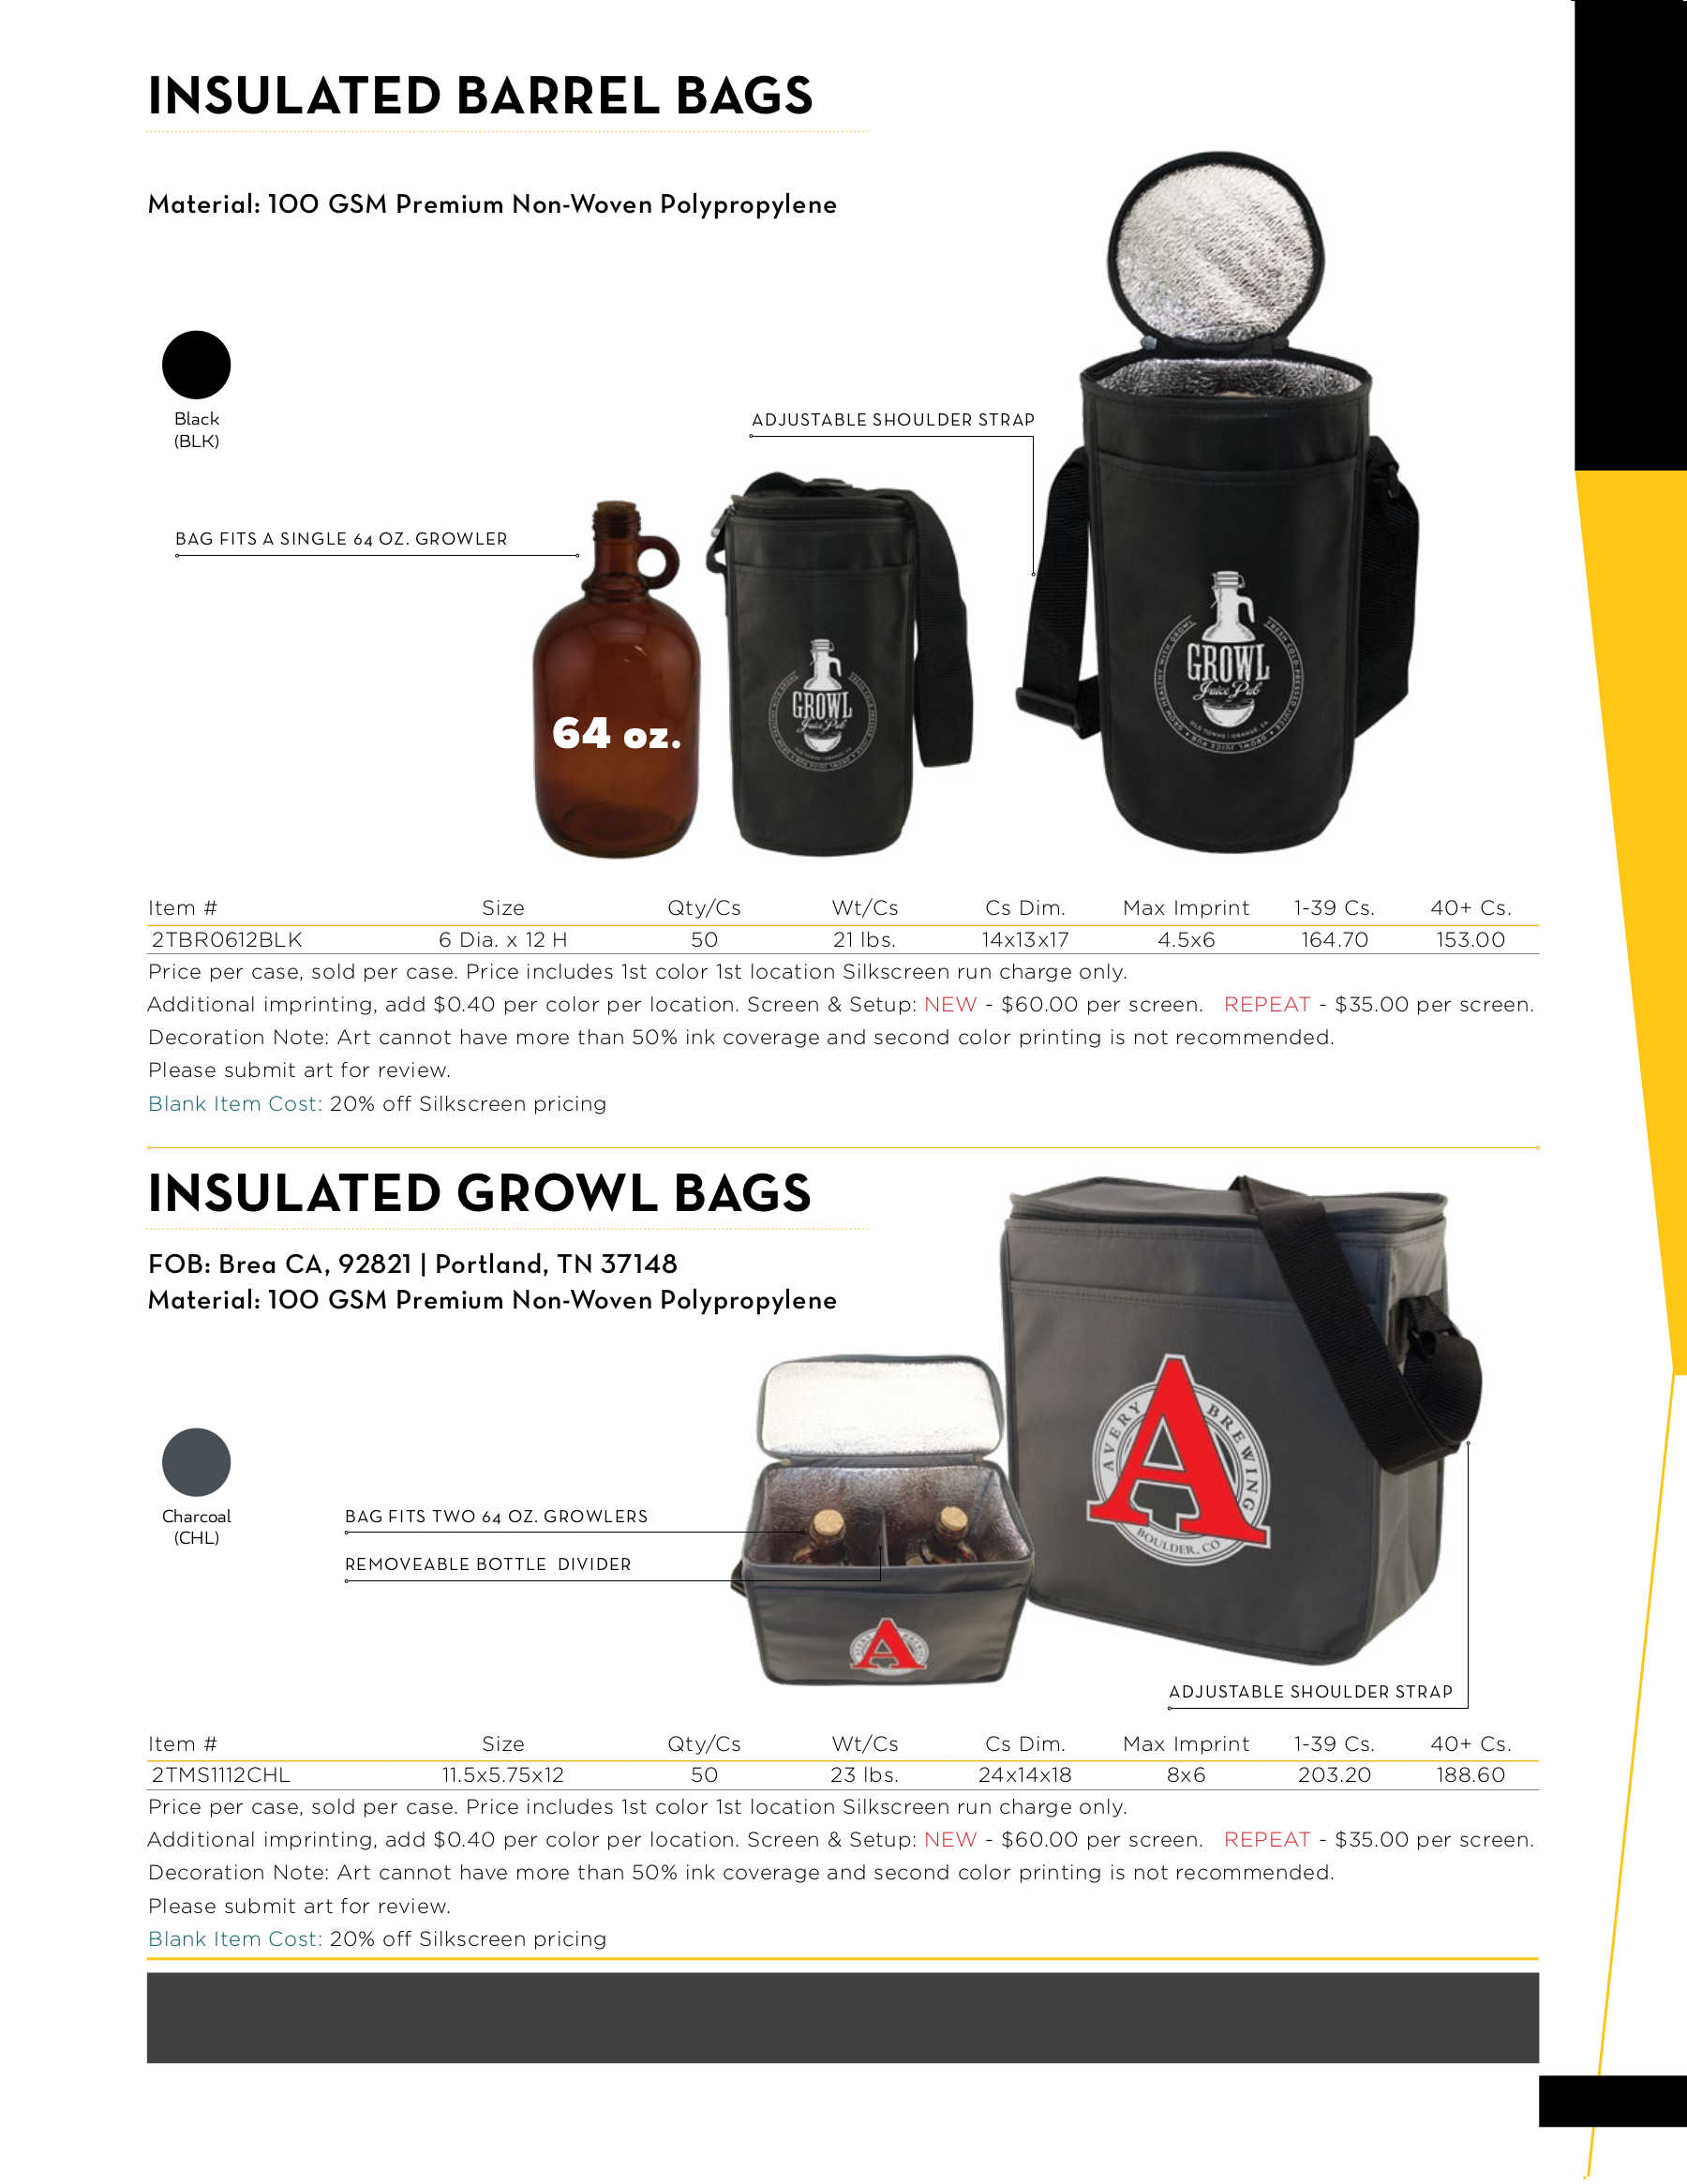 Insulated Barrel and Growl Bags